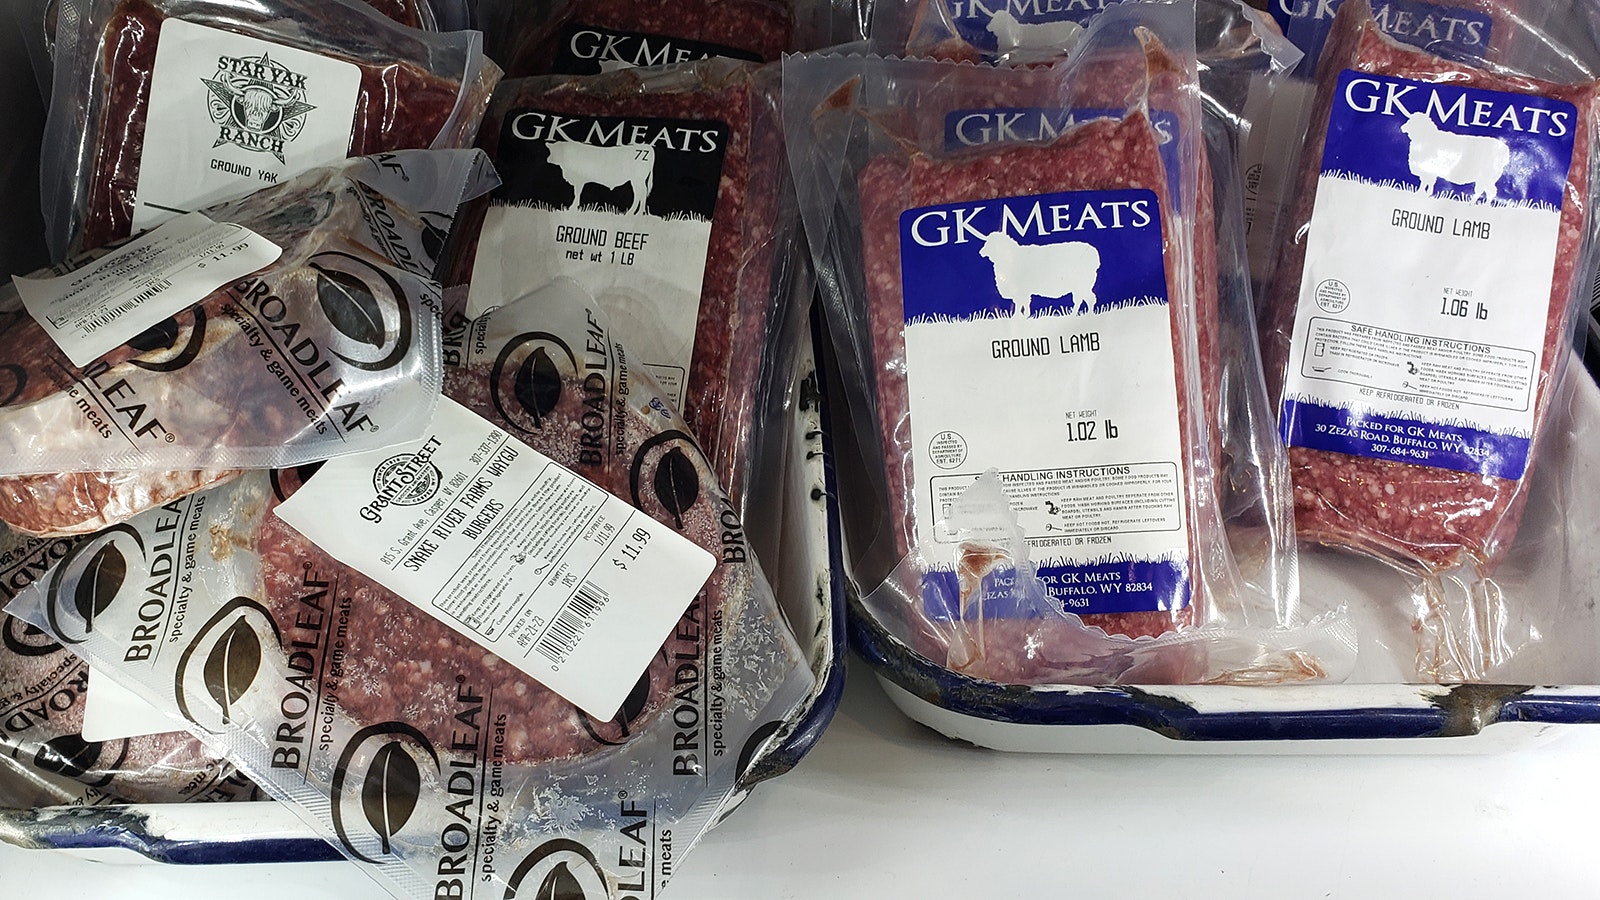 Wagyu and ground lamb are tempting options for a cookout.